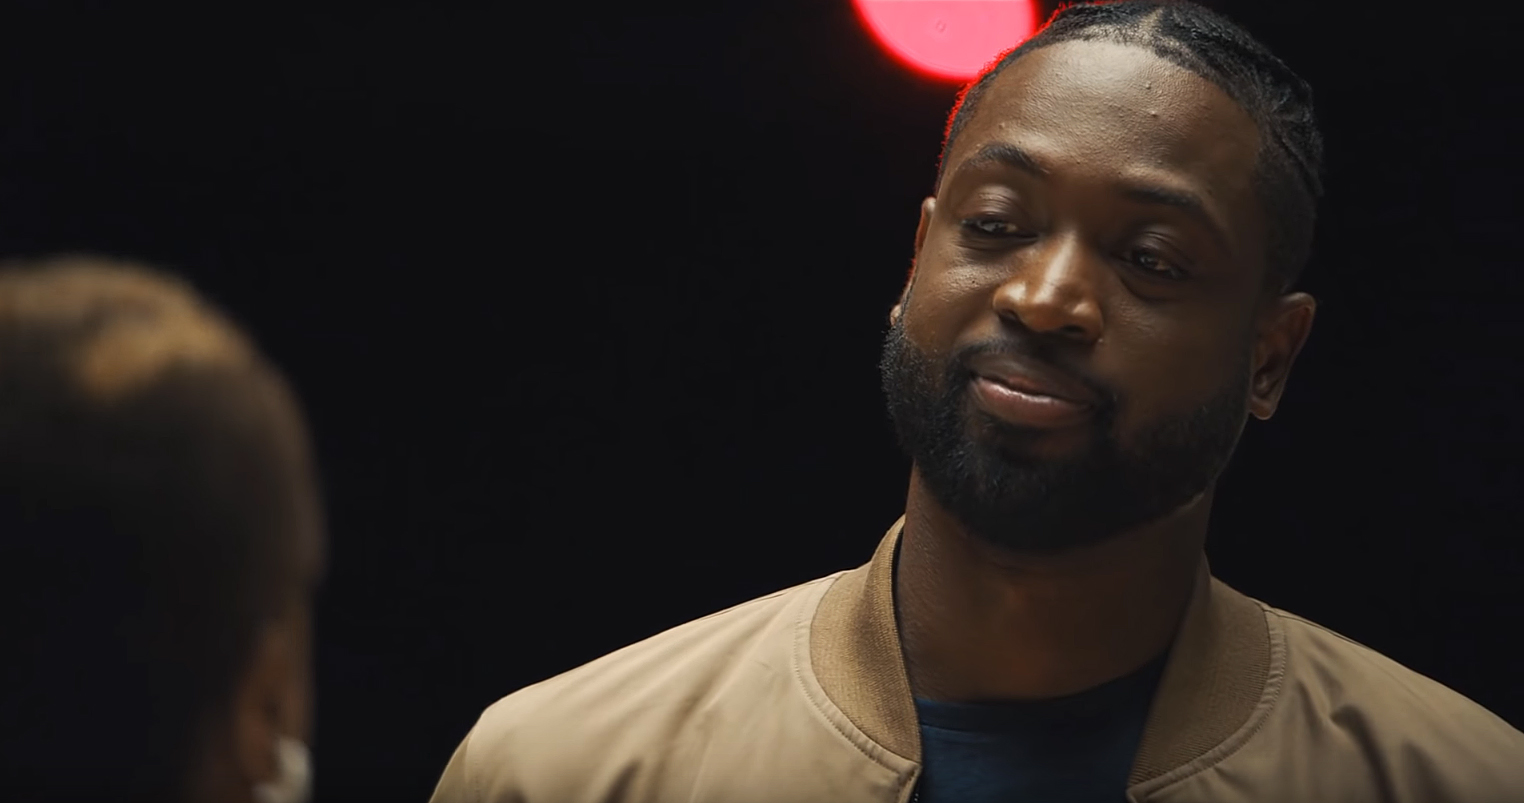 Dwyane Wade's New Budweiser Commercial Will Make You Cry: Watch